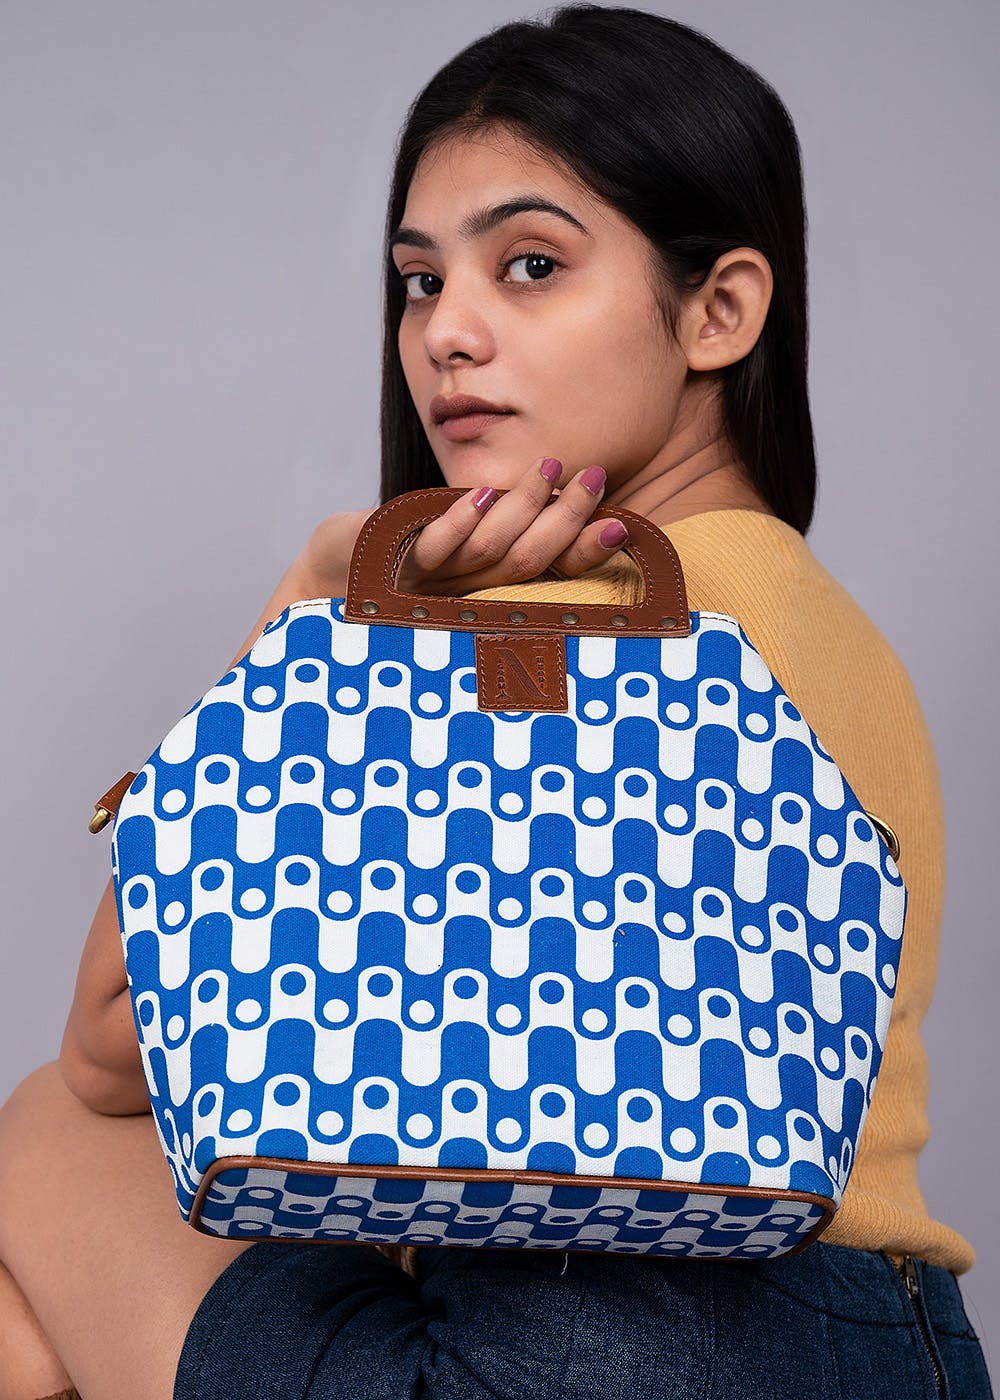 LBB, Pune - Shop for AWESOME bags from Old Tree! They're... | Facebook